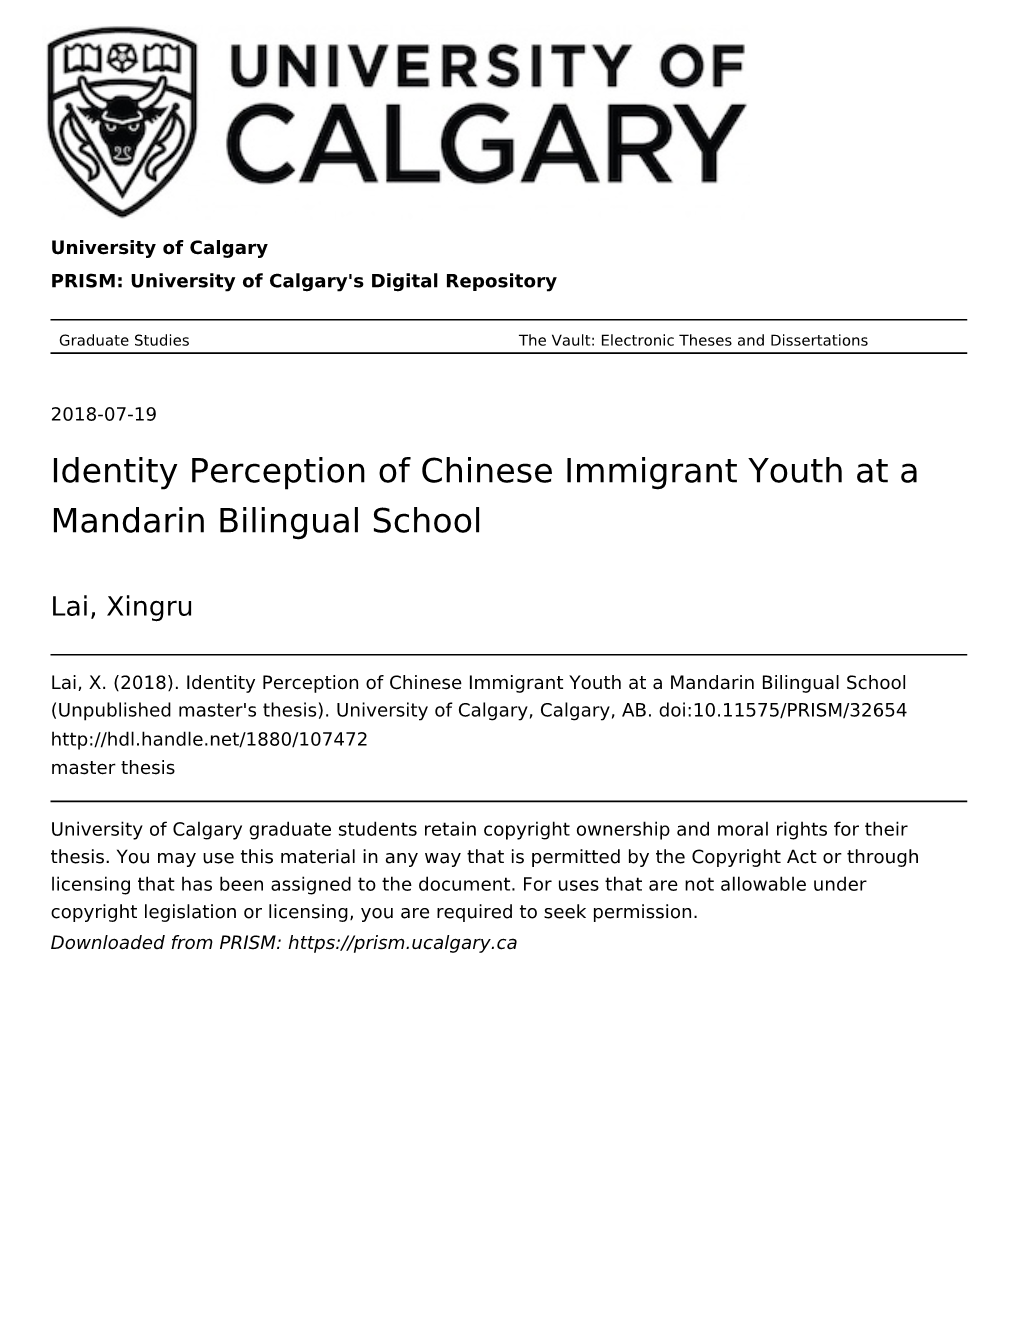 Identity Perception of Chinese Immigrant Youth at a Mandarin Bilingual School